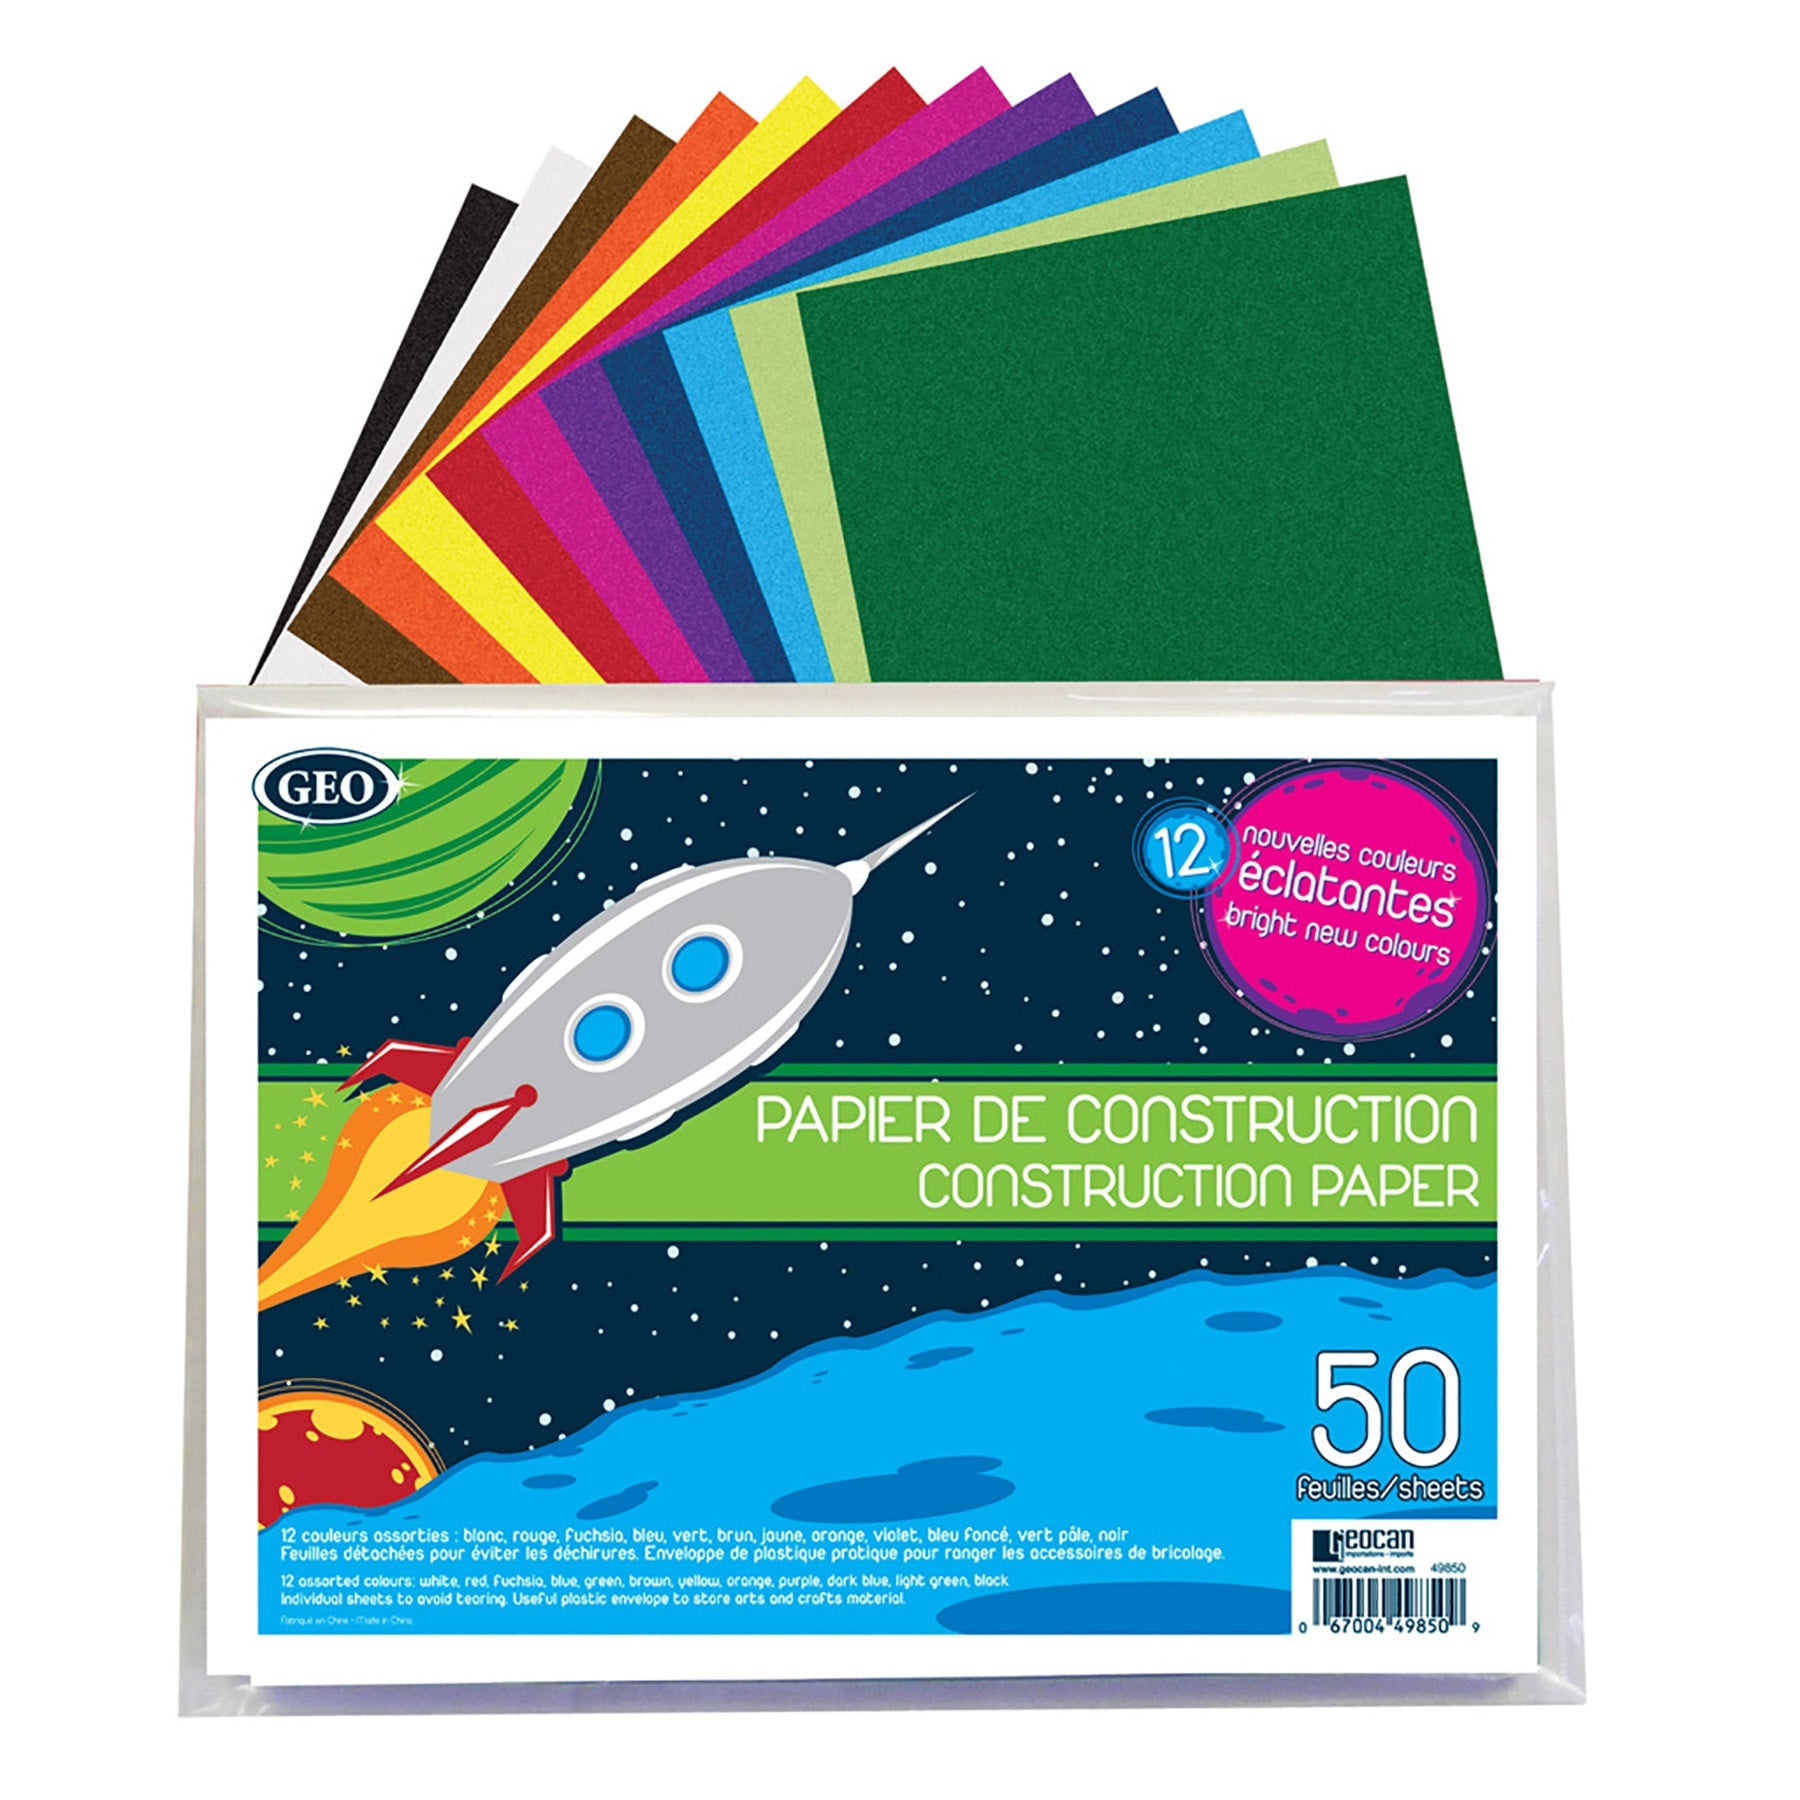 Geo 50 Sheets Construction Paper in Envelope 13x10in Envelope 8.25x11.5in Paper 